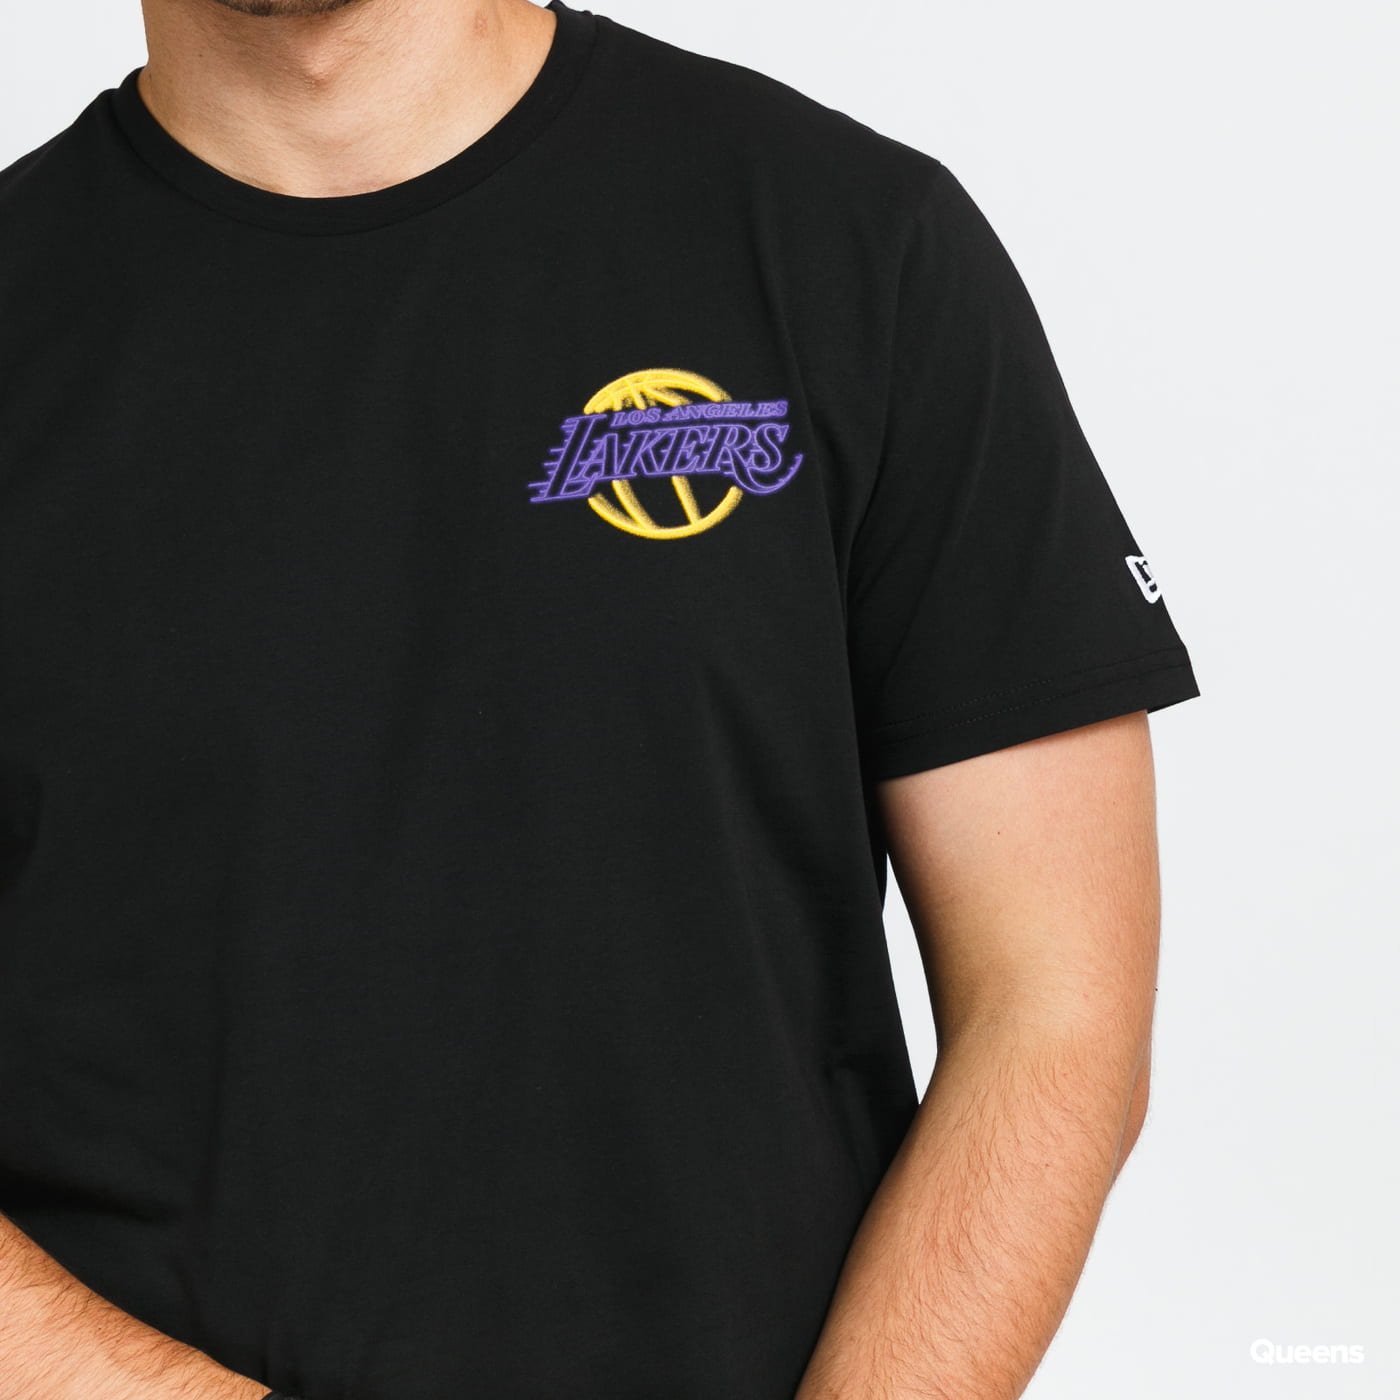 Buy the Neon Tee from Los Angeles Lakers - Brooklyn Fizz